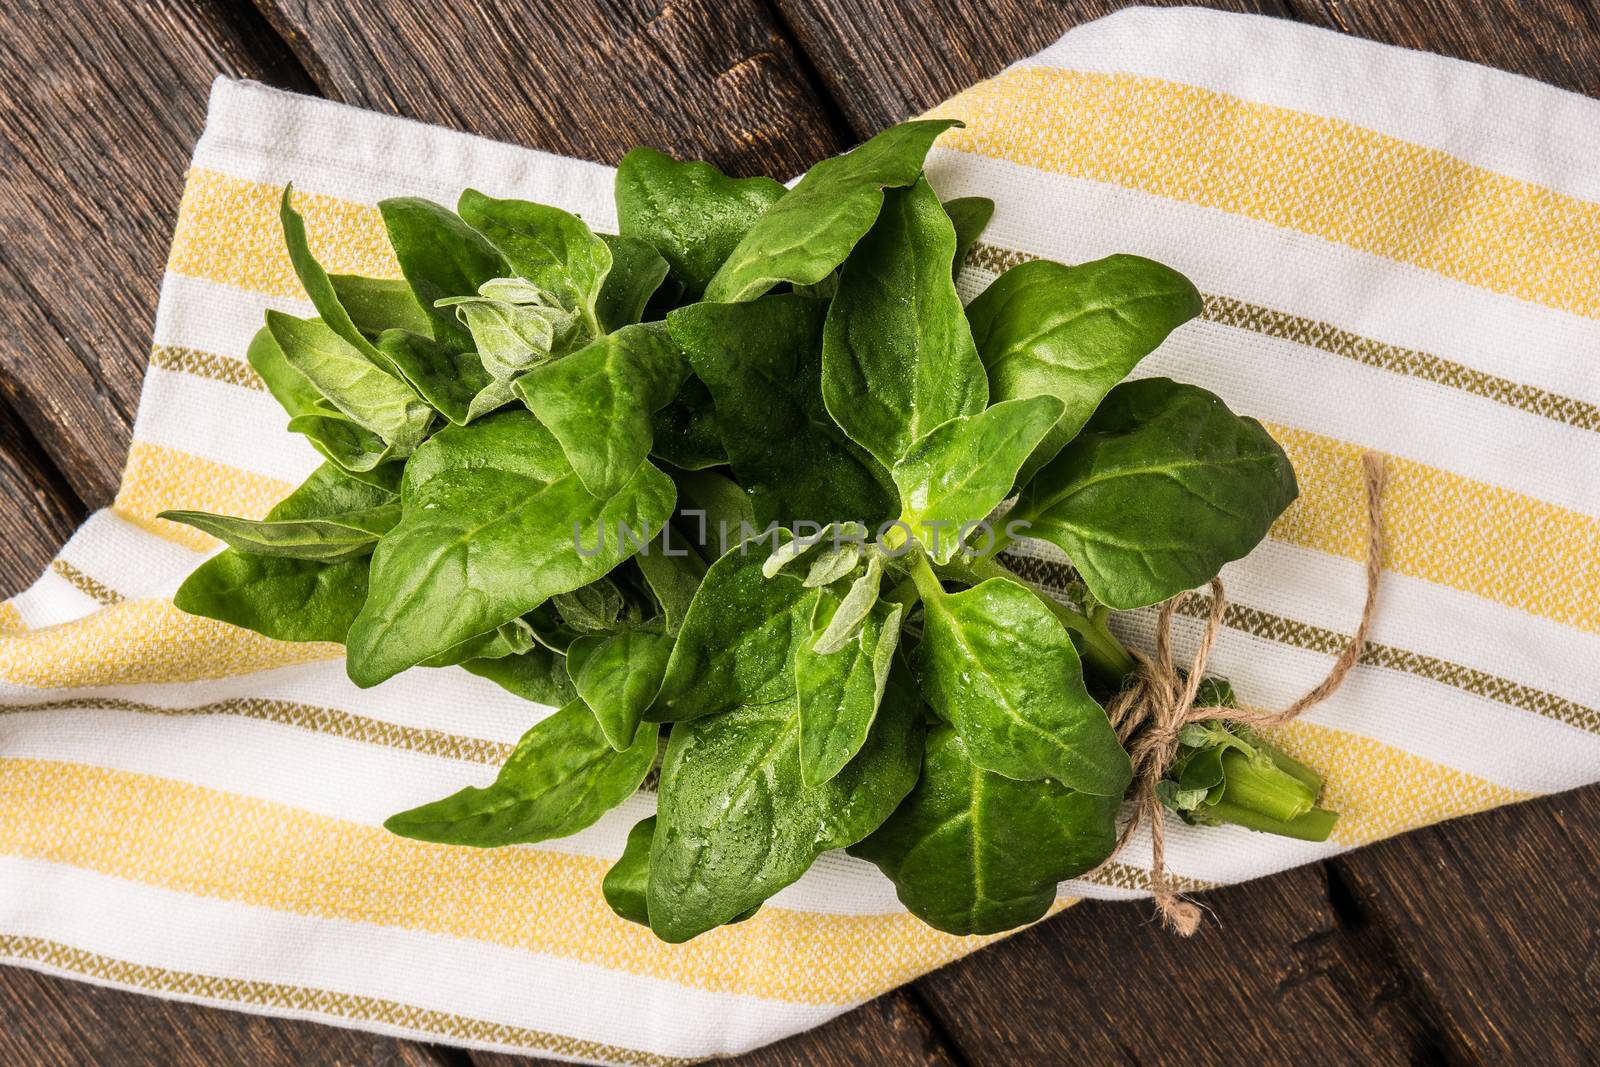 Spinach leaves on a wooden background by AnaMarques